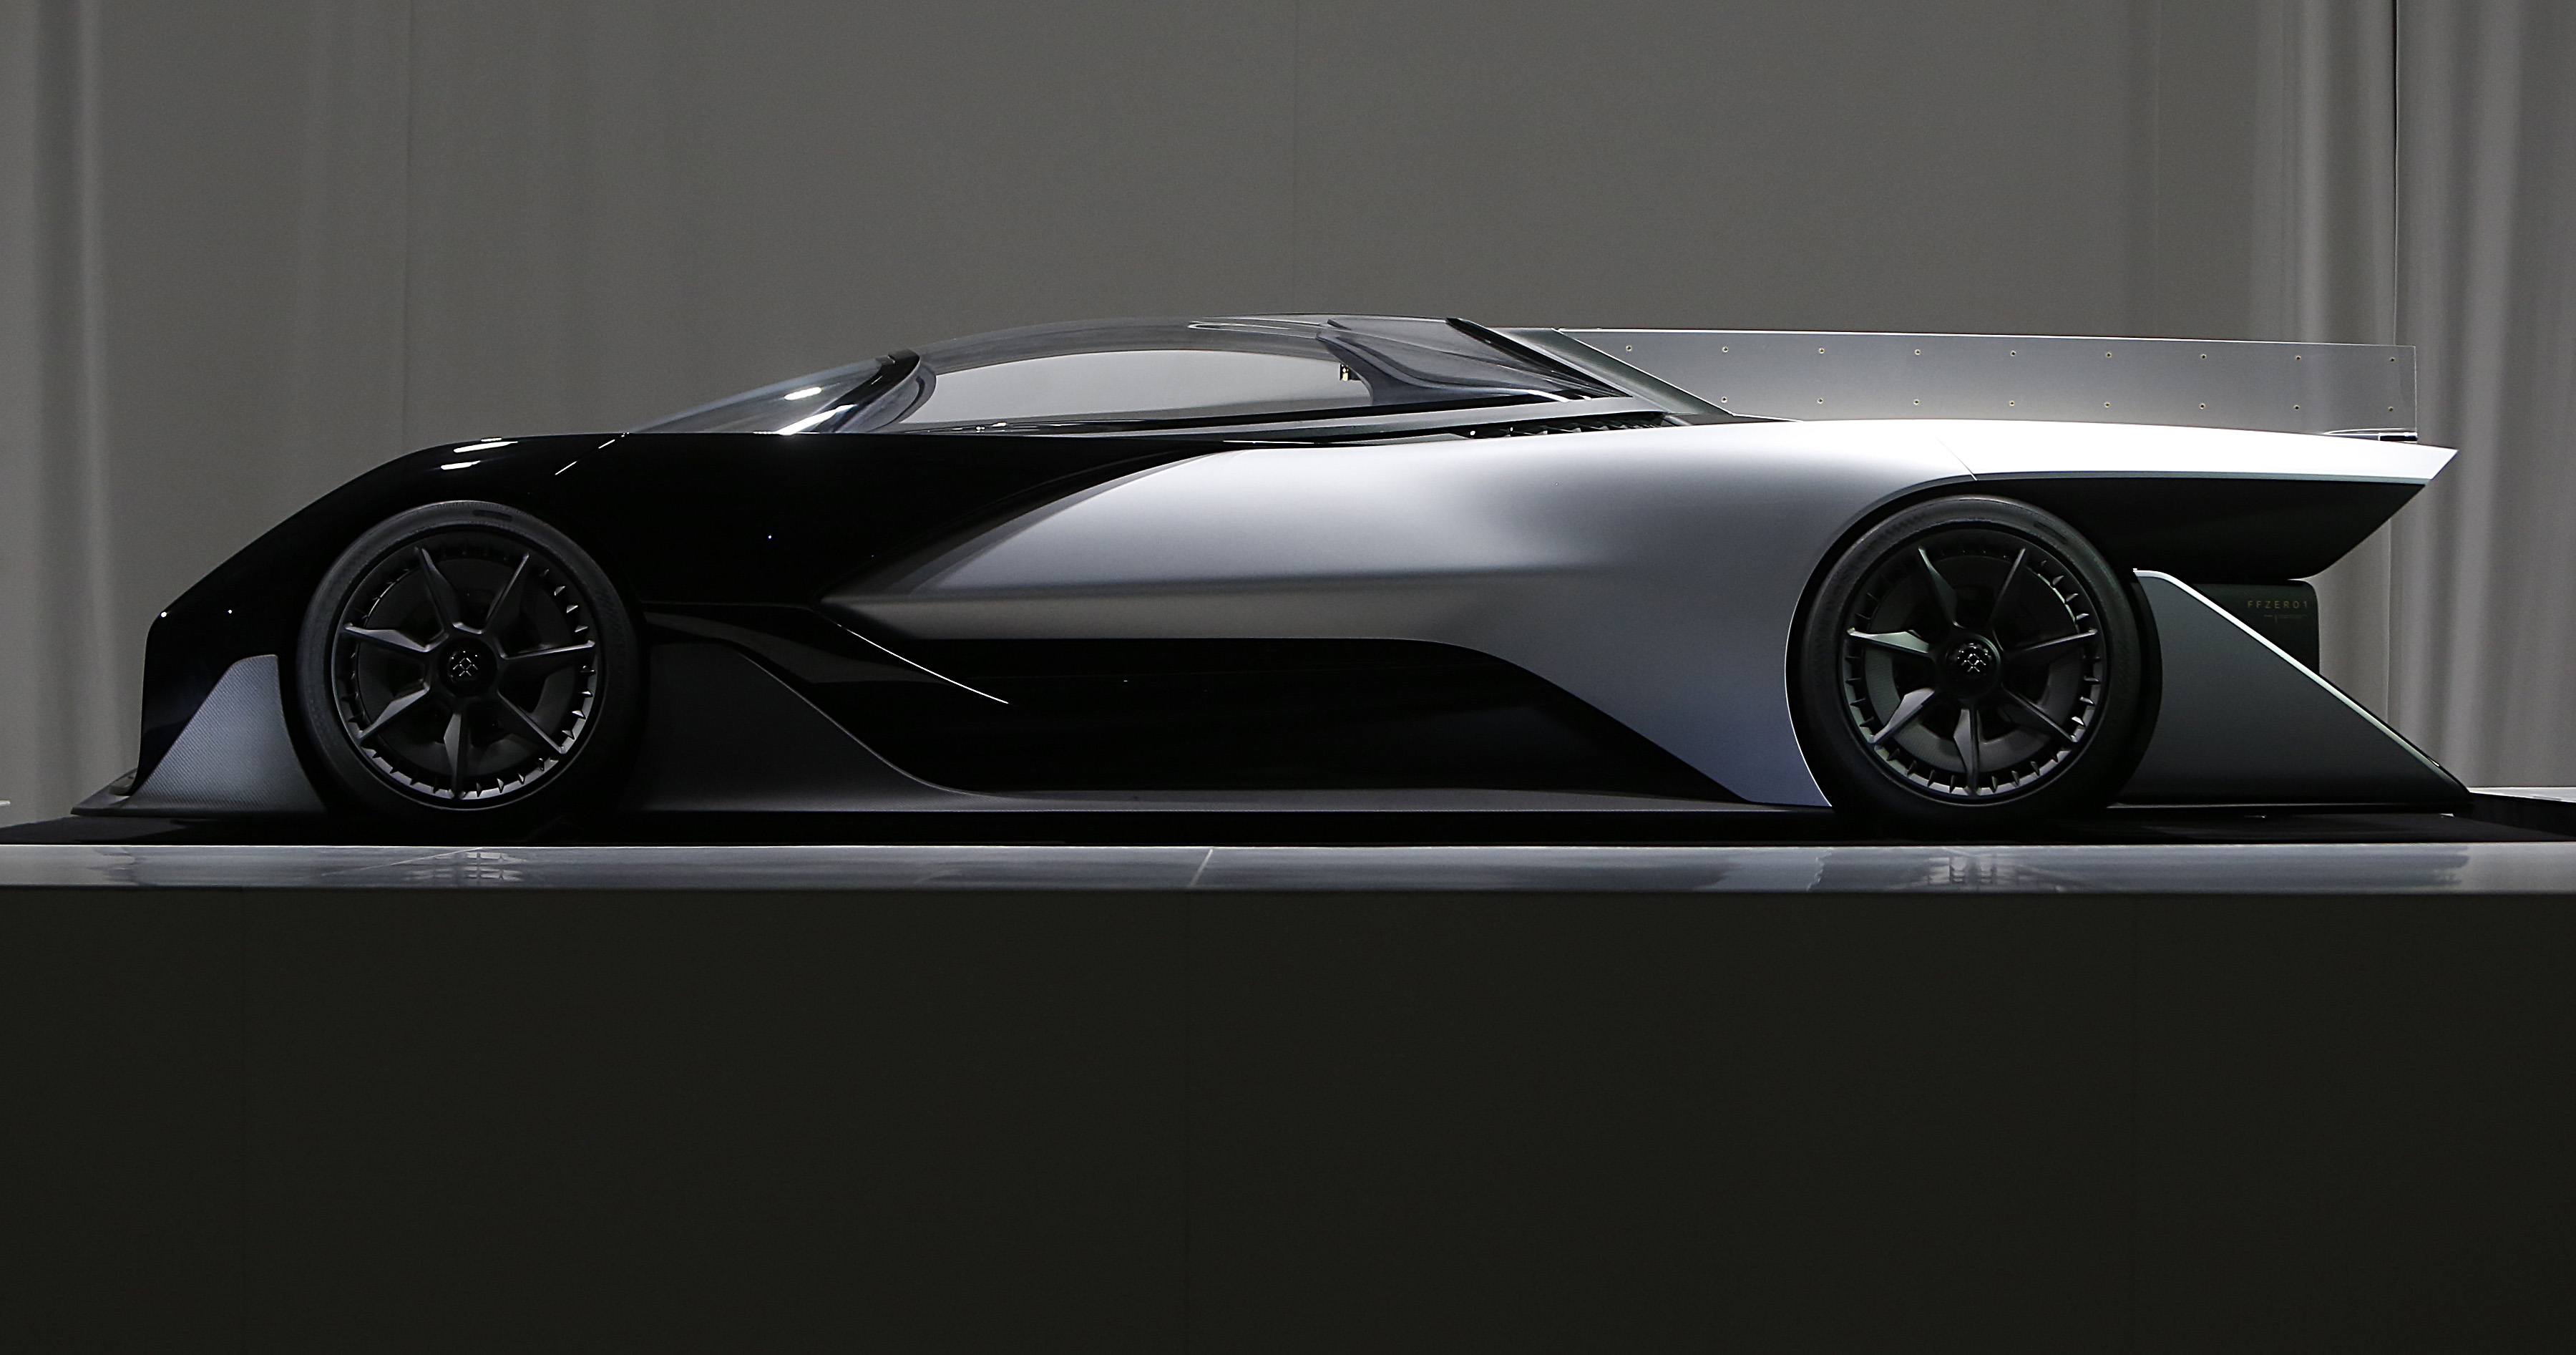 IMAGE DISTRIBUTED FOR FARADAY FUTURE - Faraday Future (FF) FFZERO1 Concept vehicle at FF's pre-CES reveal event in Las Vegas on Monday, Jan. 4, 2016. (Bizuayehu Tesfaye/AP Images for Faraday Future)